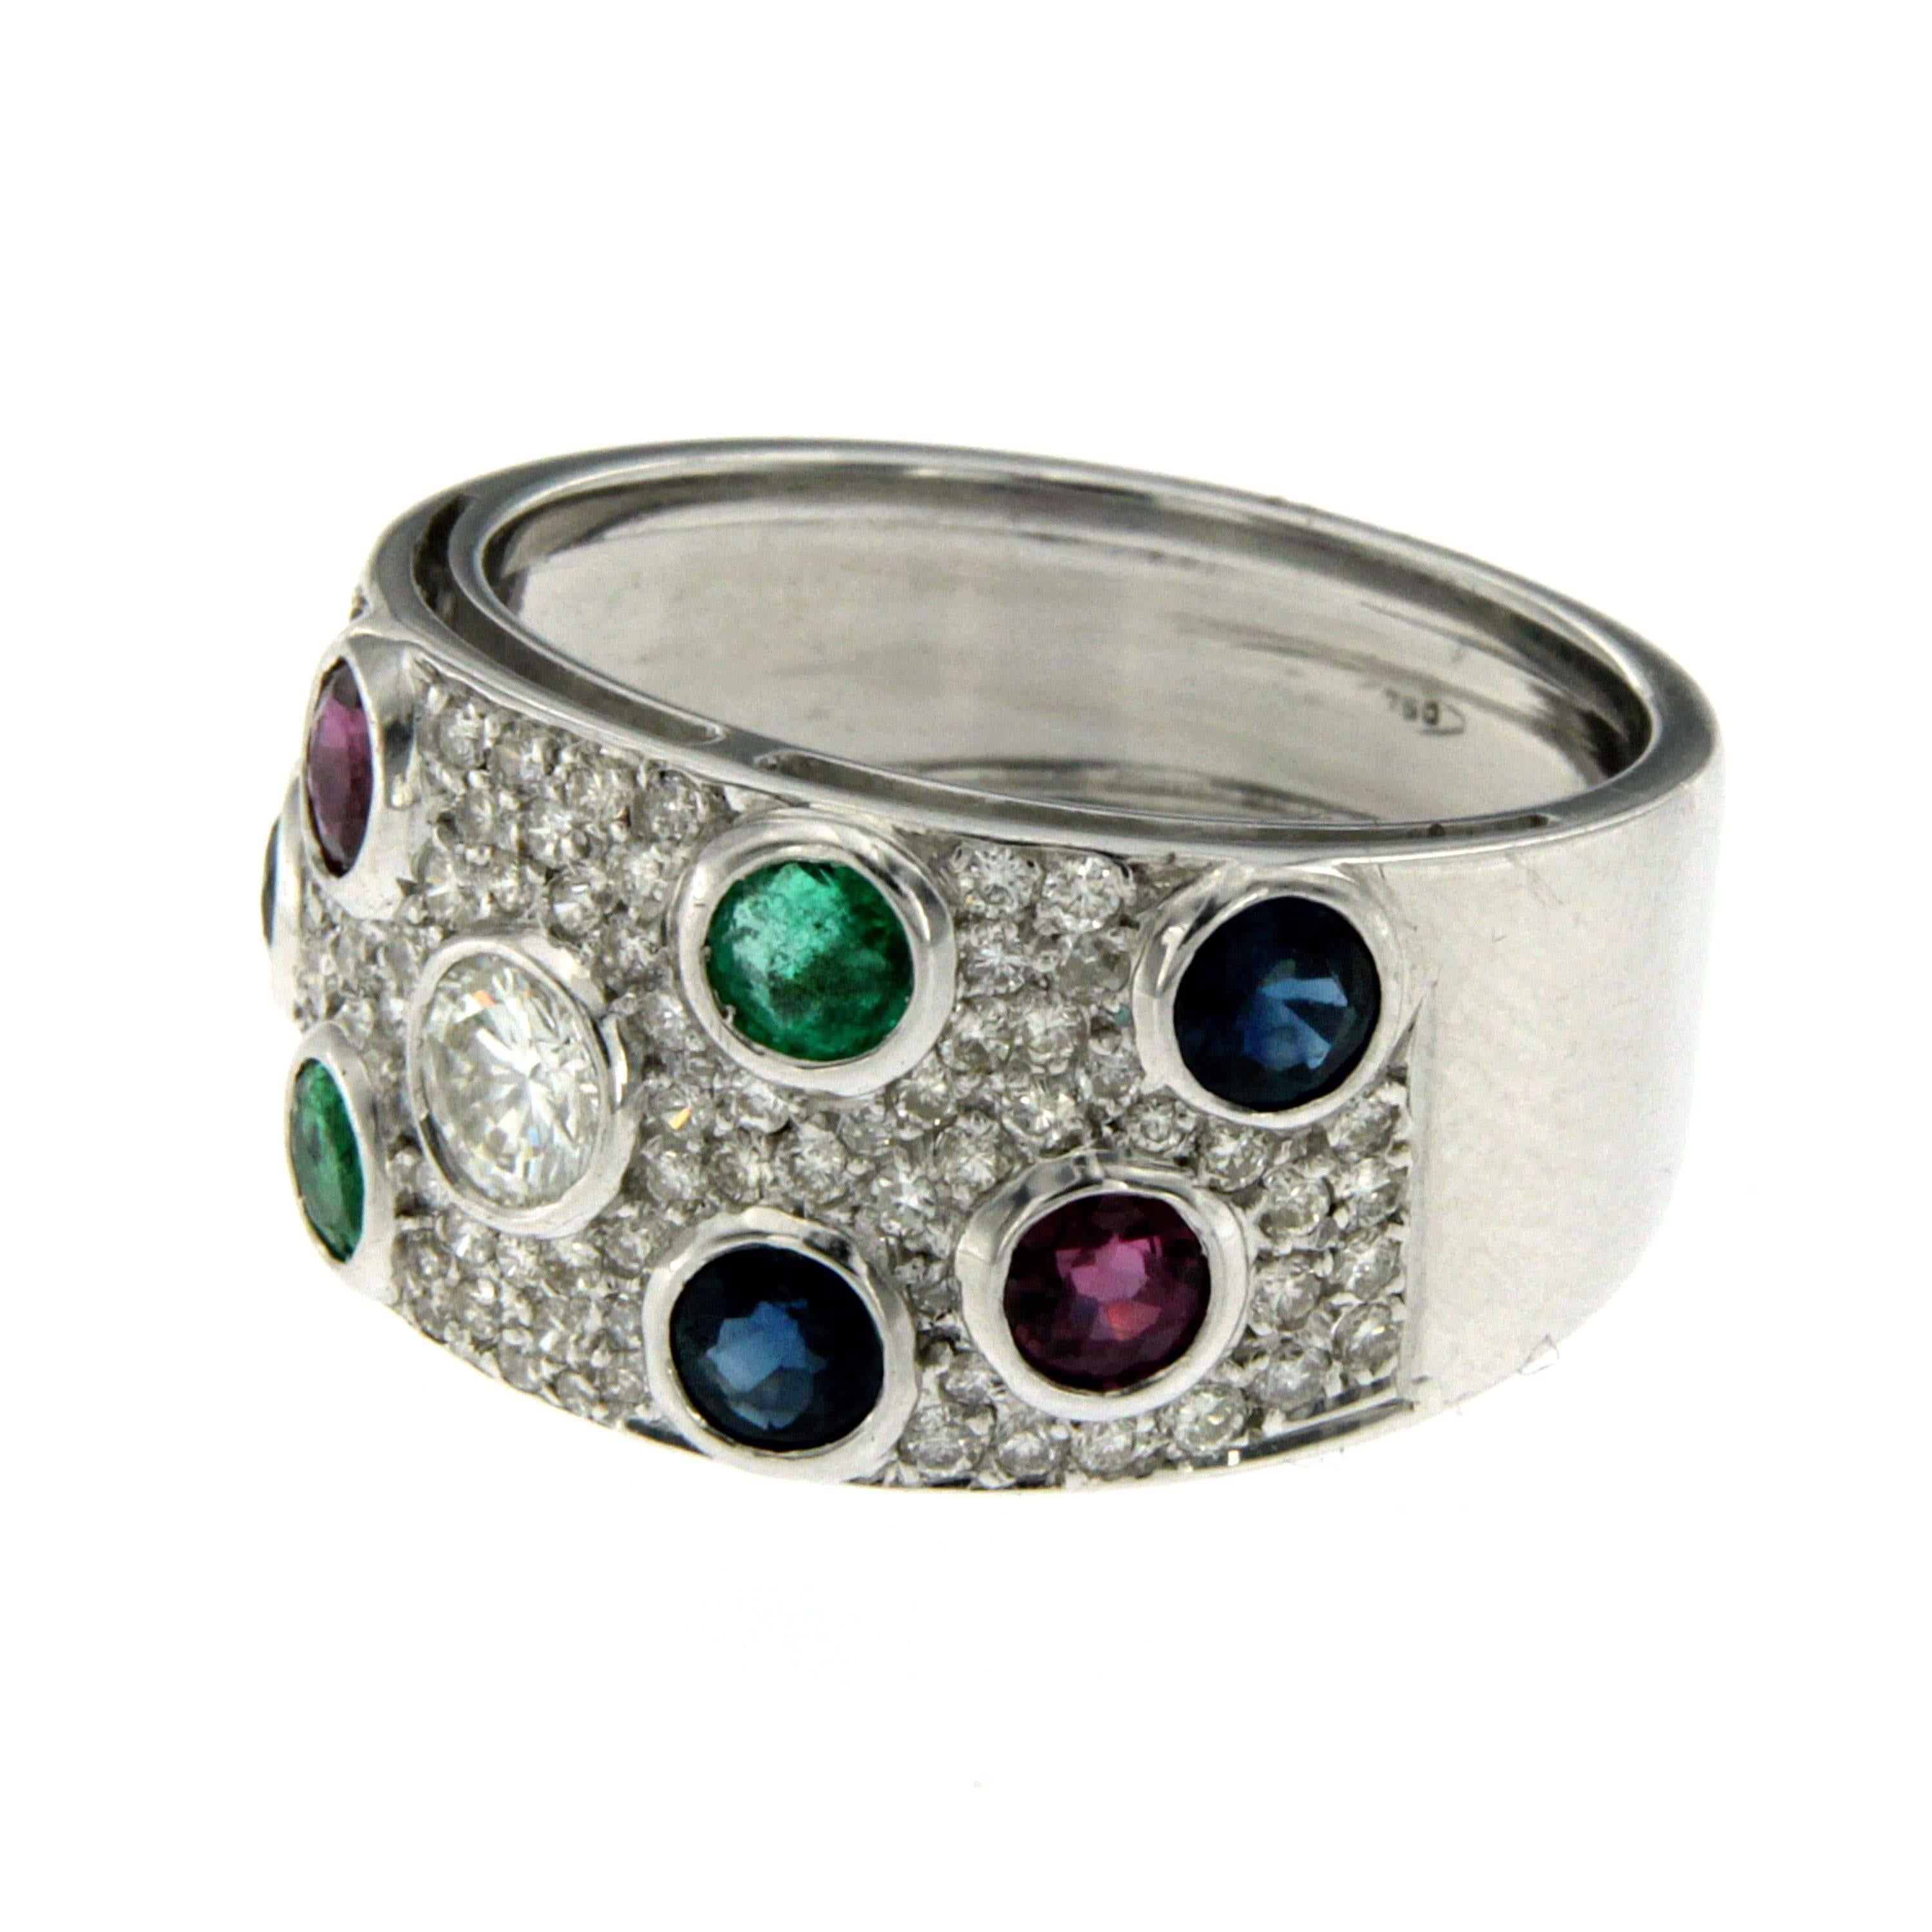 This Multi-Stone ring is set with a central Diamond weighing .80 ct, 0.30 ct of pavè diamonds, 1 ct of natural Sapphires, 0.80 ct of  natural Rubies and 0.80 ct of  natural Emeralds. 
A unique hand made ring. Made in 18K white gold.
An excellent